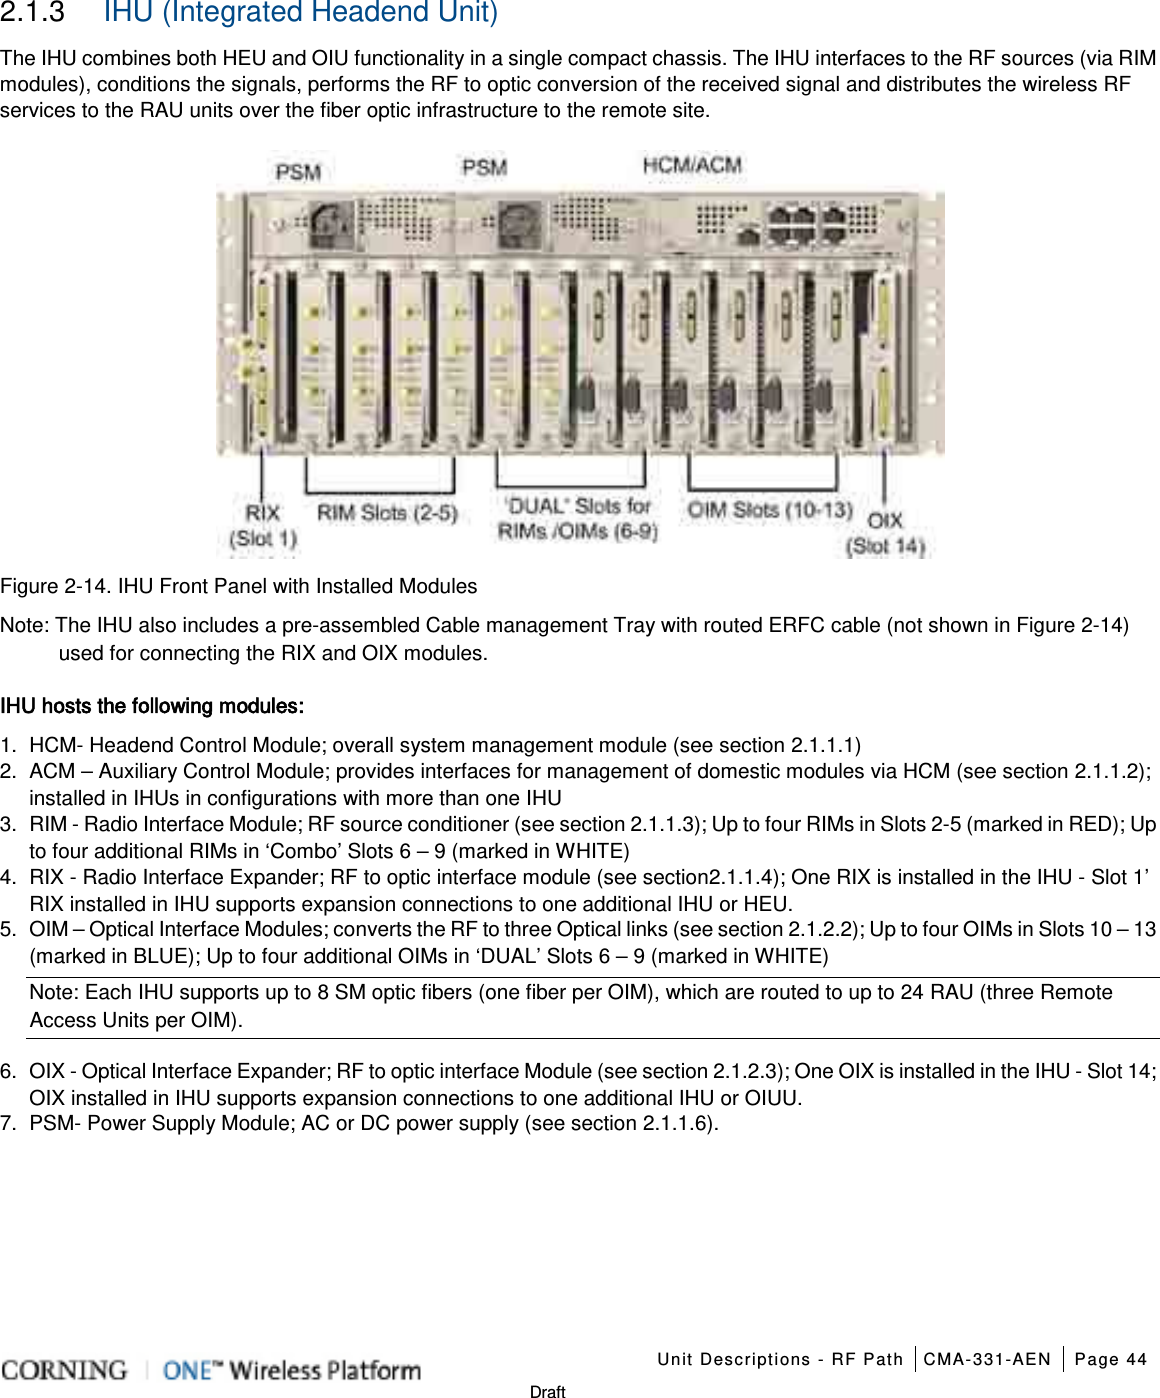    Unit Descriptions - RF Path CMA-331-AEN Page 44   Draft 2.1.3  IHU (Integrated Headend Unit) The IHU combines both HEU and OIU functionality in a single compact chassis. The IHU interfaces to the RF sources (via RIM modules), conditions the signals, performs the RF to optic conversion of the received signal and distributes the wireless RF services to the RAU units over the fiber optic infrastructure to the remote site.  Figure  2-14. IHU Front Panel with Installed Modules Note: The IHU also includes a pre-assembled Cable management Tray with routed ERFC cable (not shown in Figure  2-14) used for connecting the RIX and OIX modules. IHU hosts the following modules: 1.  HCM- Headend Control Module; overall system management module (see section  2.1.1.1) 2.  ACM – Auxiliary Control Module; provides interfaces for management of domestic modules via HCM (see section  2.1.1.2); installed in IHUs in configurations with more than one IHU   3.  RIM - Radio Interface Module; RF source conditioner (see section  2.1.1.3); Up to four RIMs in Slots 2-5 (marked in RED); Up to four additional RIMs in ‘Combo’ Slots 6 – 9 (marked in WHITE) 4.  RIX - Radio Interface Expander; RF to optic interface module (see section 2.1.1.4); One RIX is installed in the IHU - Slot 1’ RIX installed in IHU supports expansion connections to one additional IHU or HEU. 5.  OIM – Optical Interface Modules; converts the RF to three Optical links (see section  2.1.2.2); Up to four OIMs in Slots 10 – 13 (marked in BLUE); Up to four additional OIMs in ‘DUAL’ Slots 6 – 9 (marked in WHITE) Note: Each IHU supports up to 8 SM optic fibers (one fiber per OIM), which are routed to up to 24 RAU (three Remote Access Units per OIM). 6.  OIX - Optical Interface Expander; RF to optic interface Module (see section  2.1.2.3); One OIX is installed in the IHU - Slot 14; OIX installed in IHU supports expansion connections to one additional IHU or OIUU. 7.  PSM- Power Supply Module; AC or DC power supply (see section  2.1.1.6).     